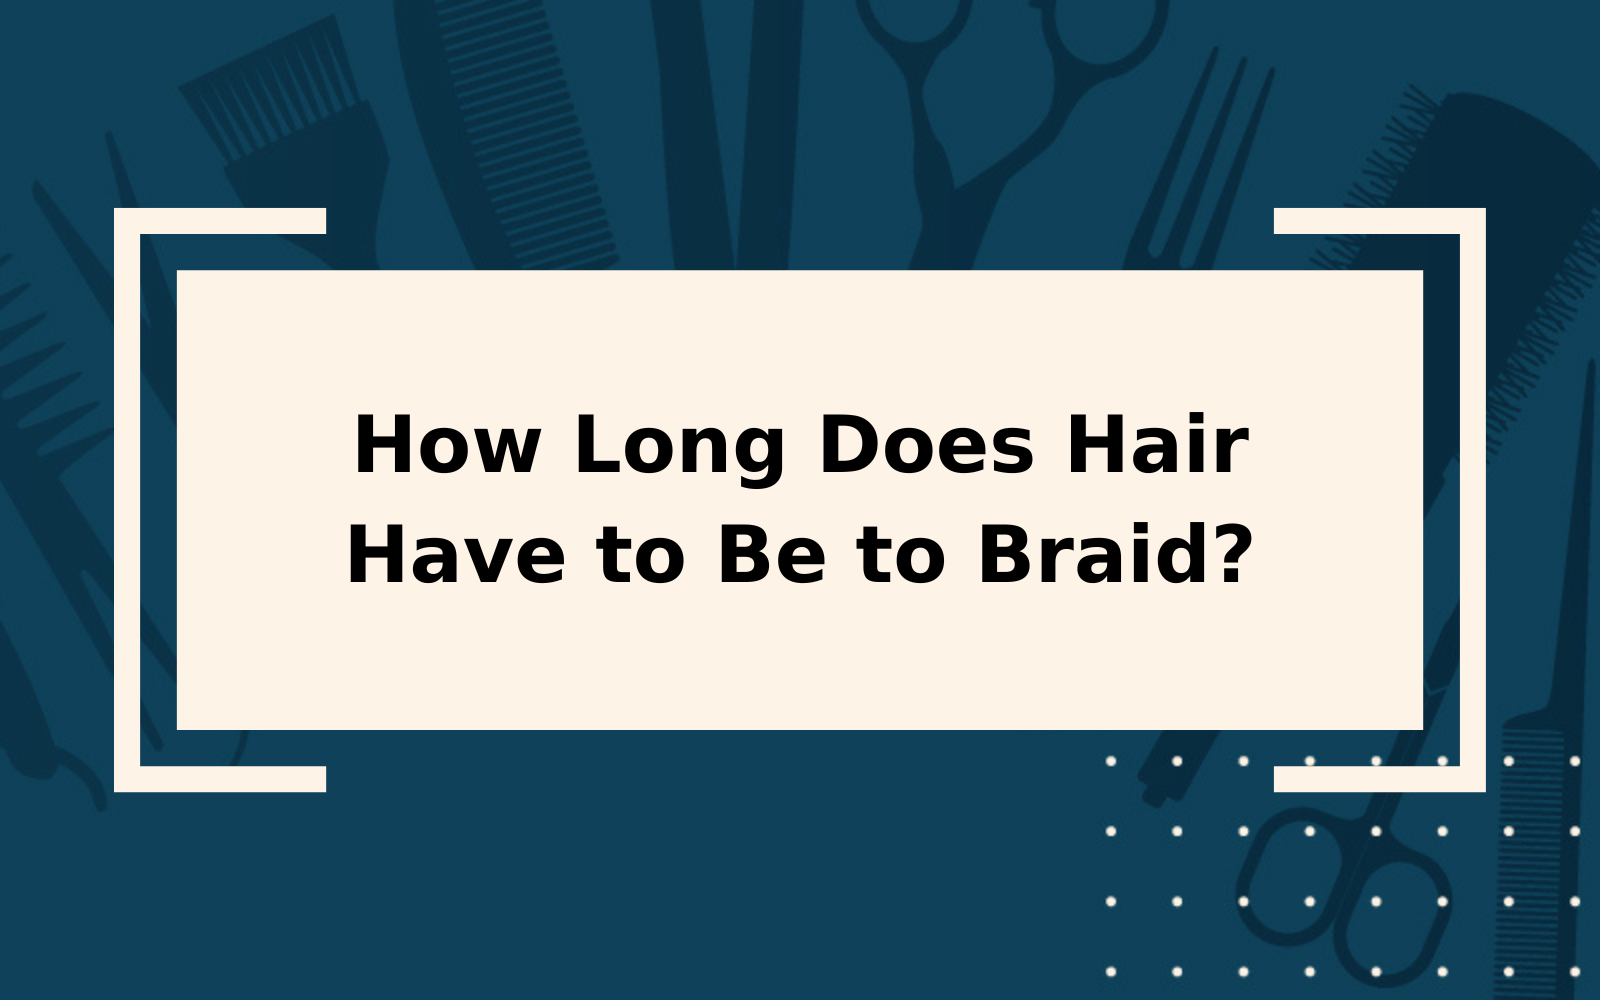 How Long Does Hair Have to Be to Braid?